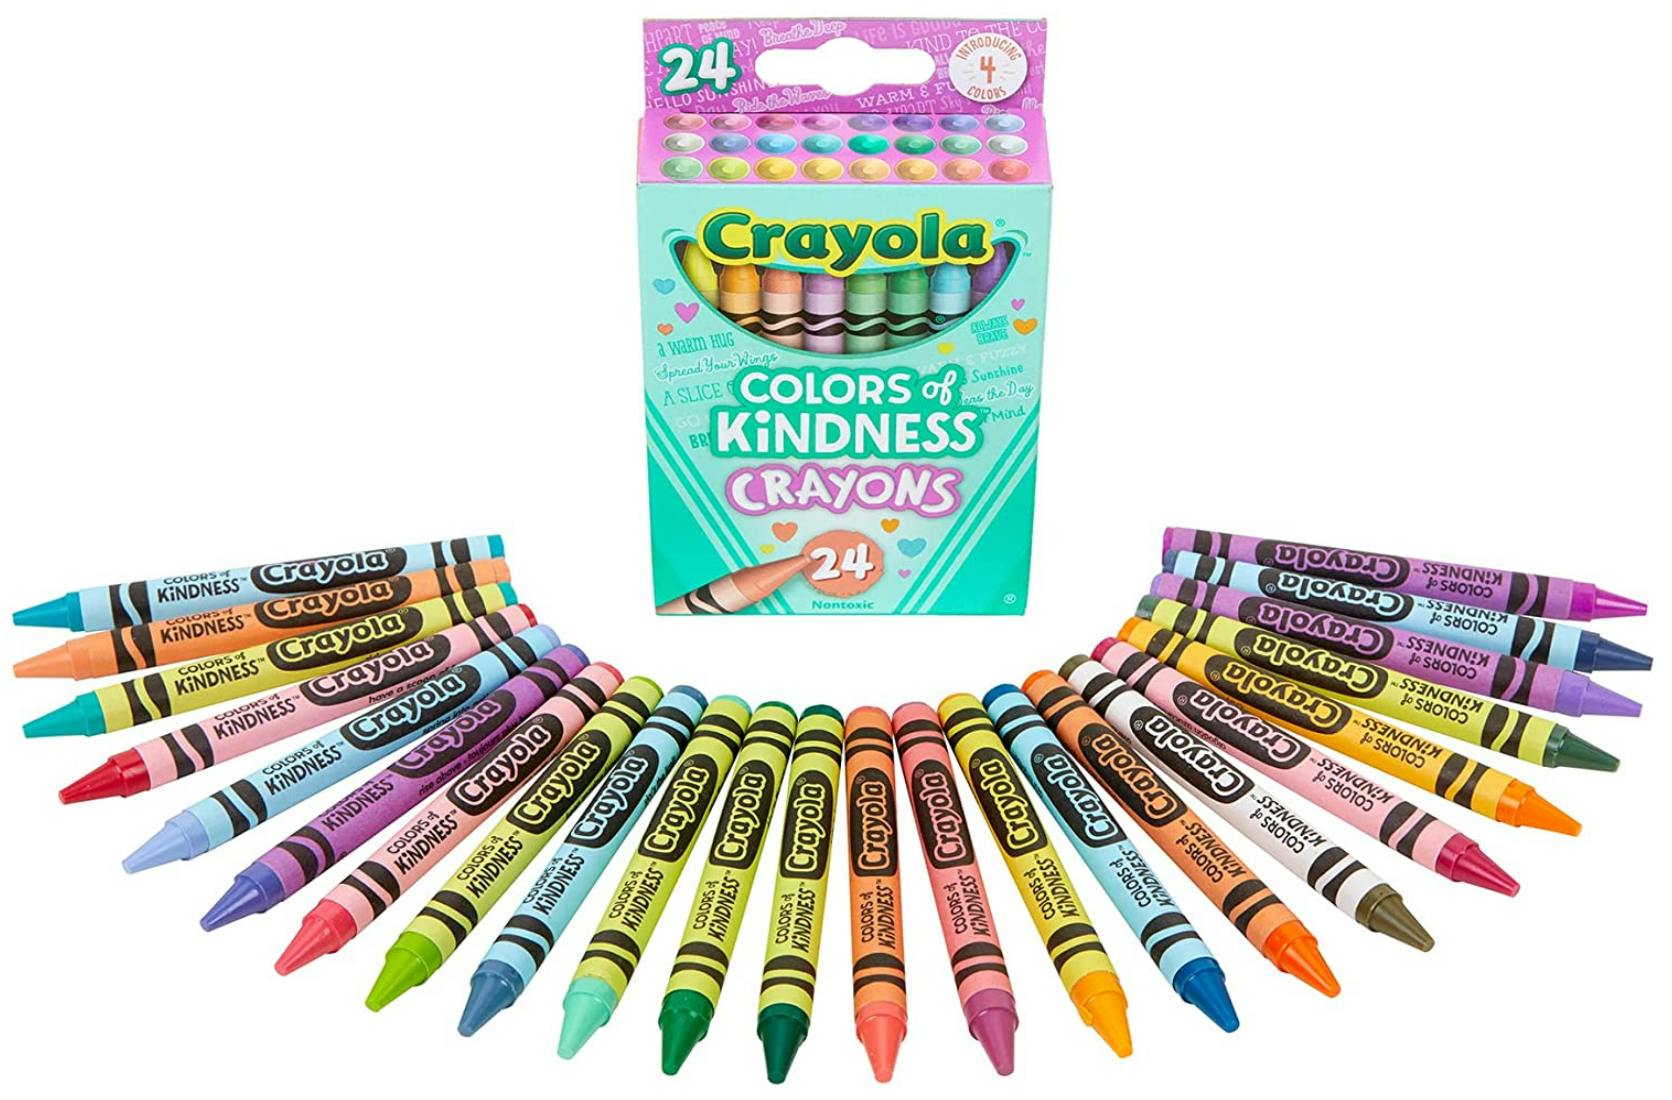 crayola-colors-of-kindness-24-count-crayons-only-1-58-on-amazon-the